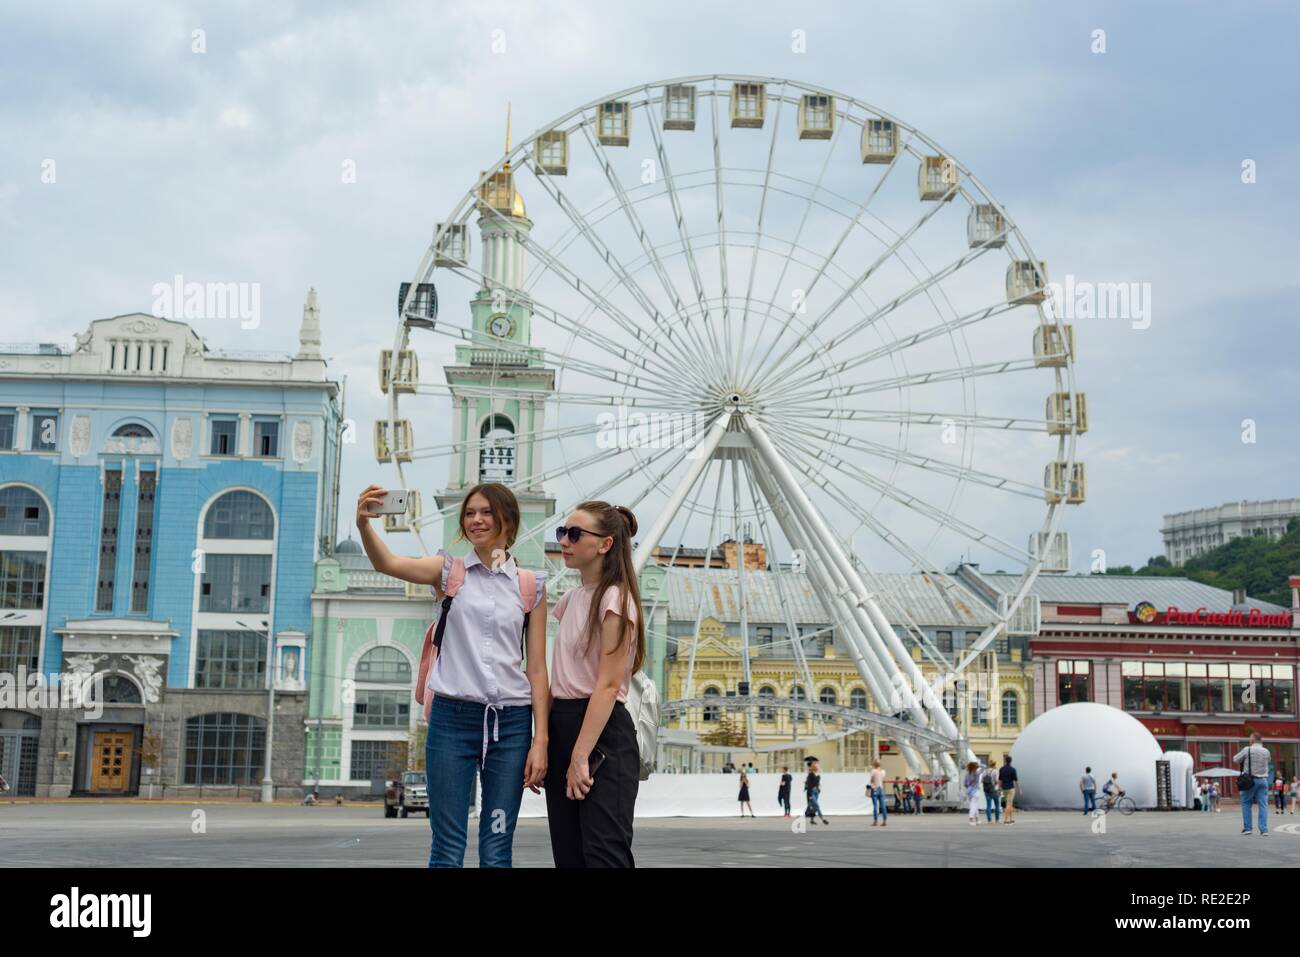 European city, entertainment ferris wheel on the square. Young girls tourists are photographed in the background of the Ferris wh Stock Photo